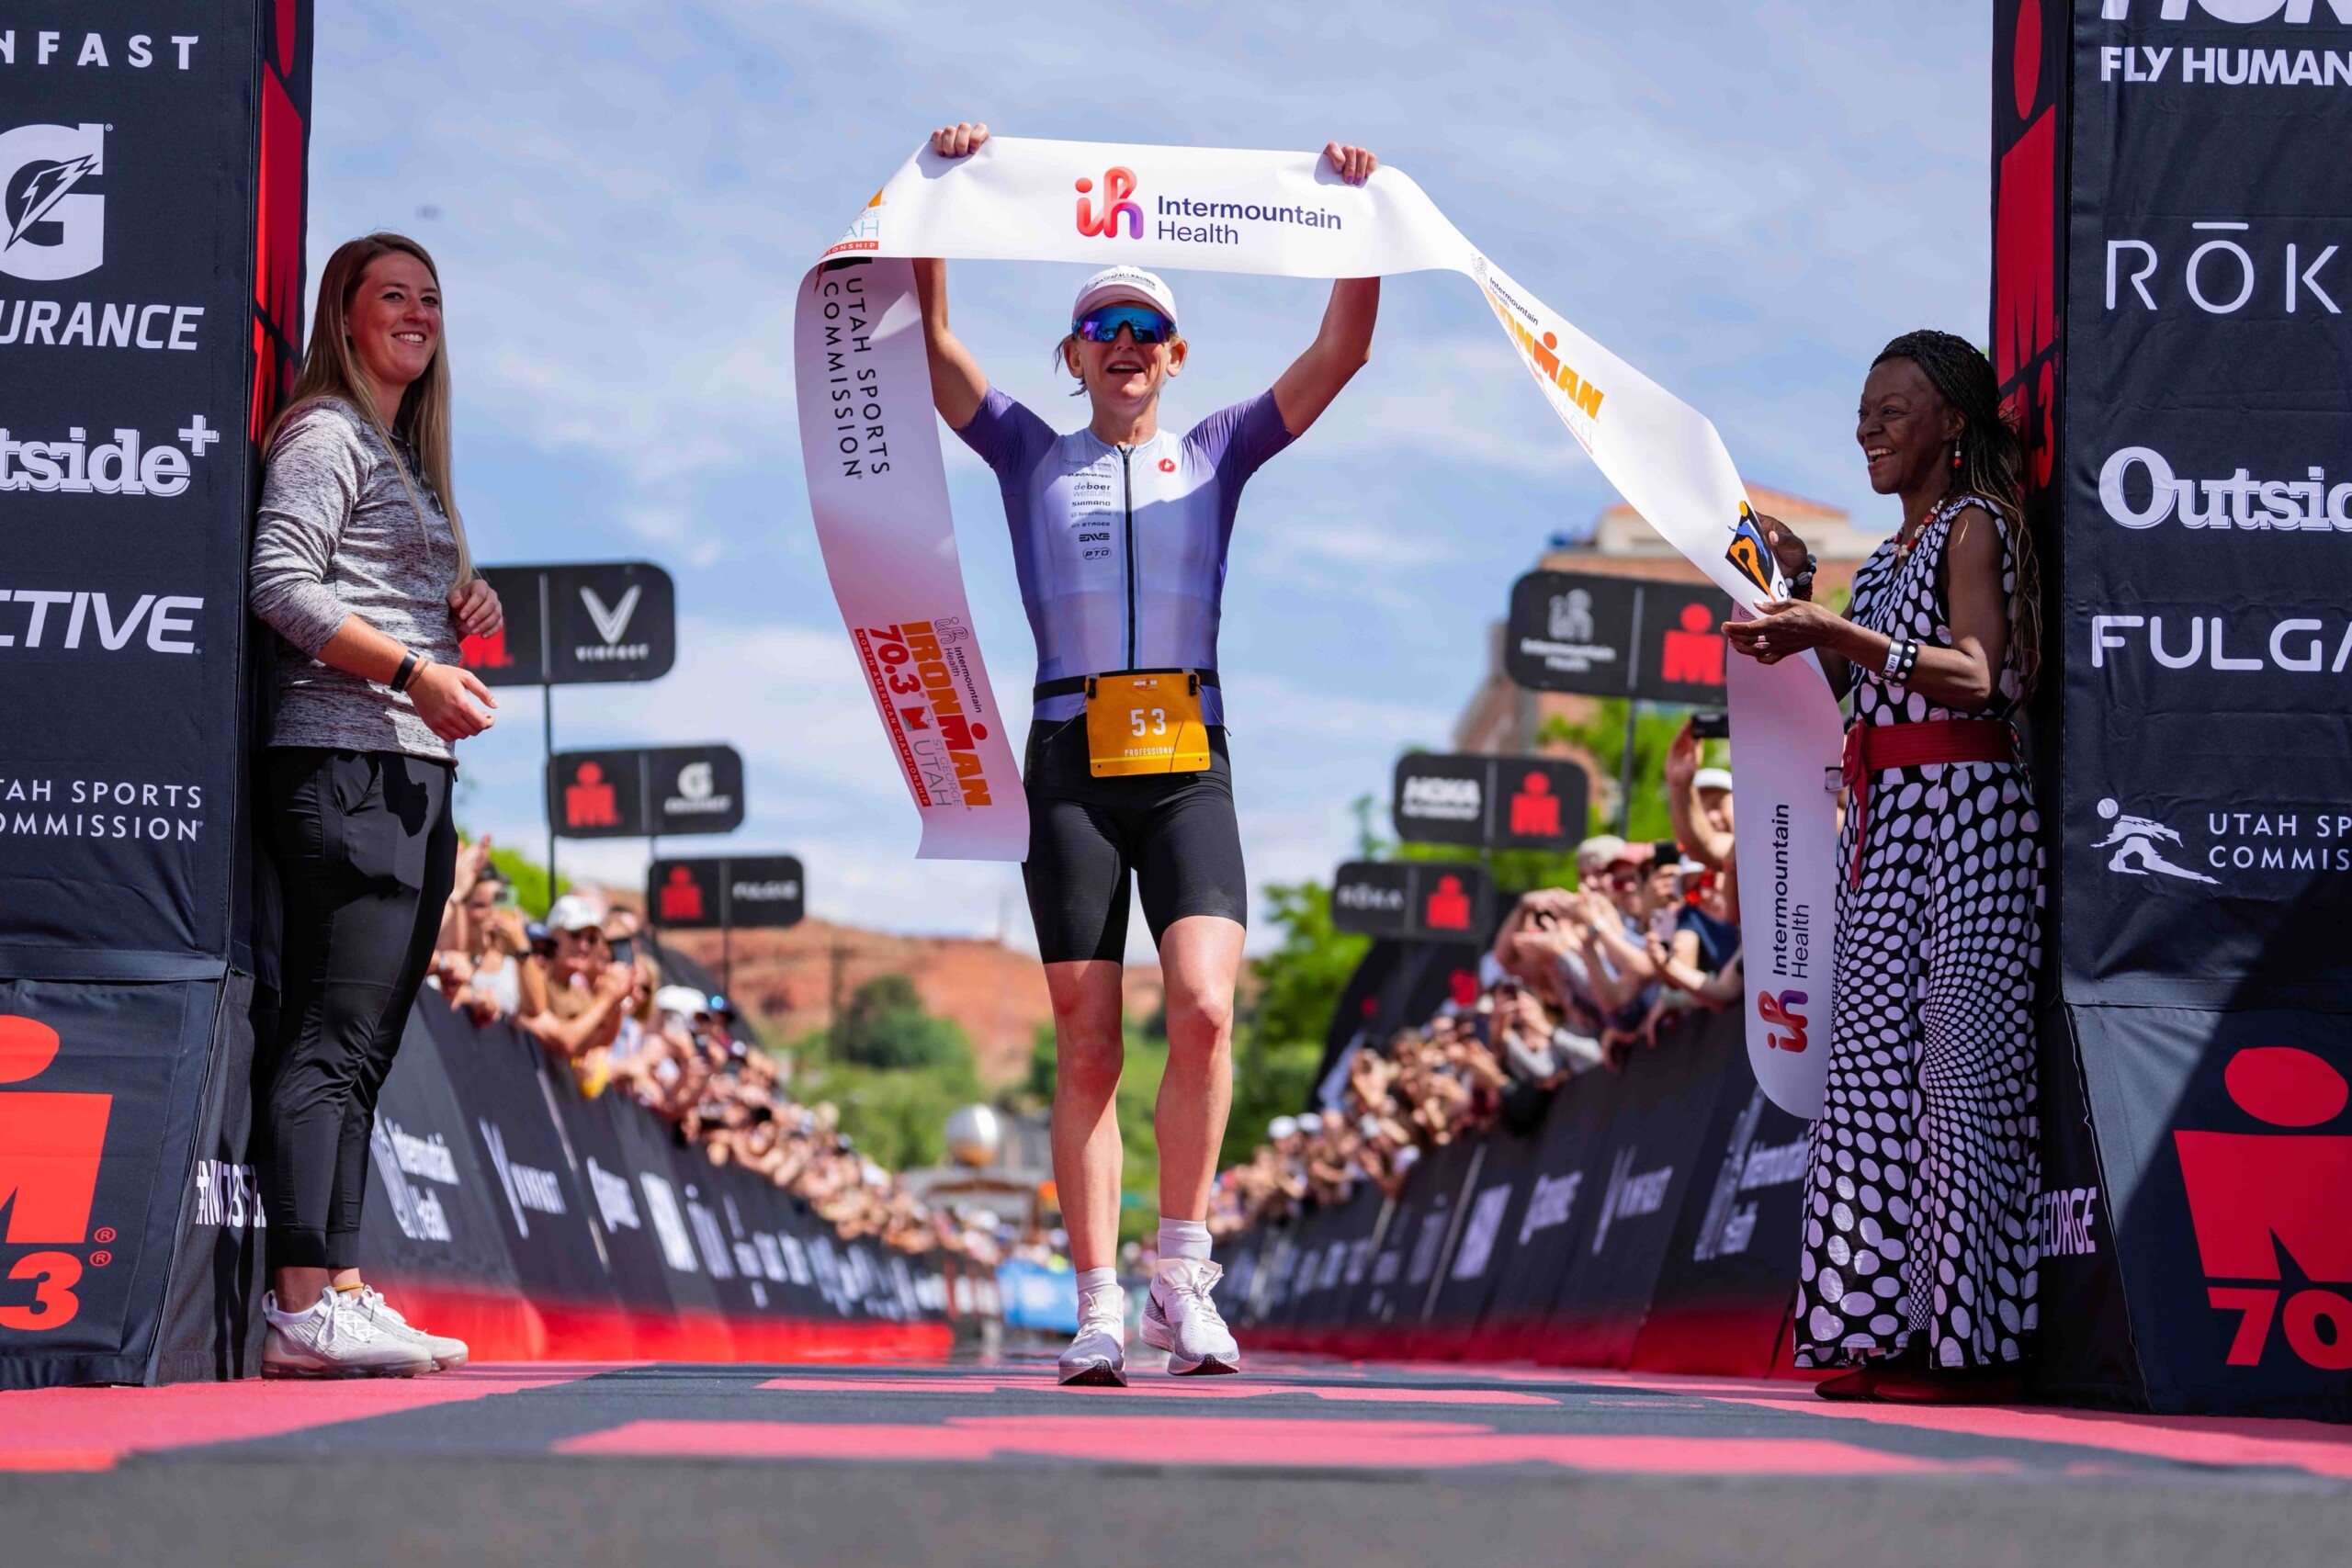 Sam Long (USA) and Jeanni Metzler (South Africa) Top Competition at IRONMAN 70.3 North American Championship Triathlon in St. George, Utah